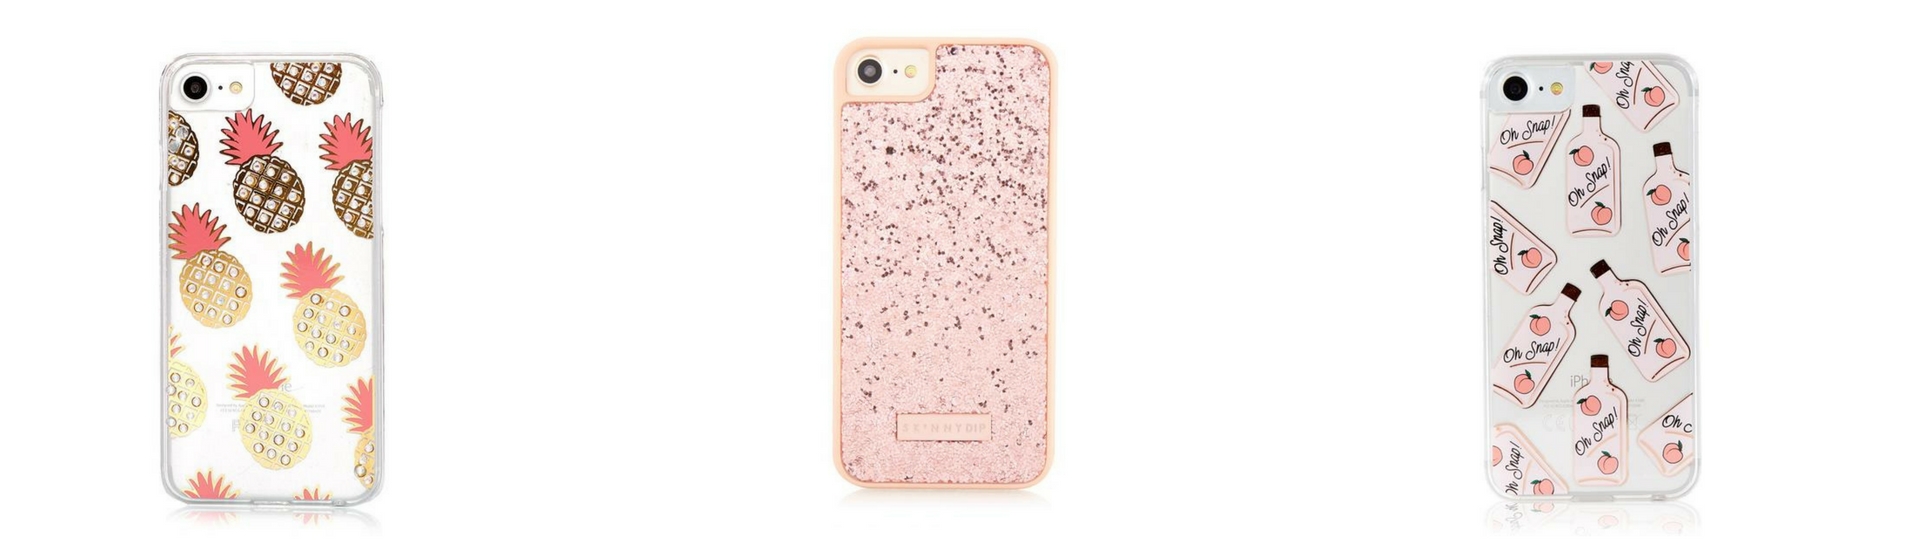 Most Popular Phone Cases Product